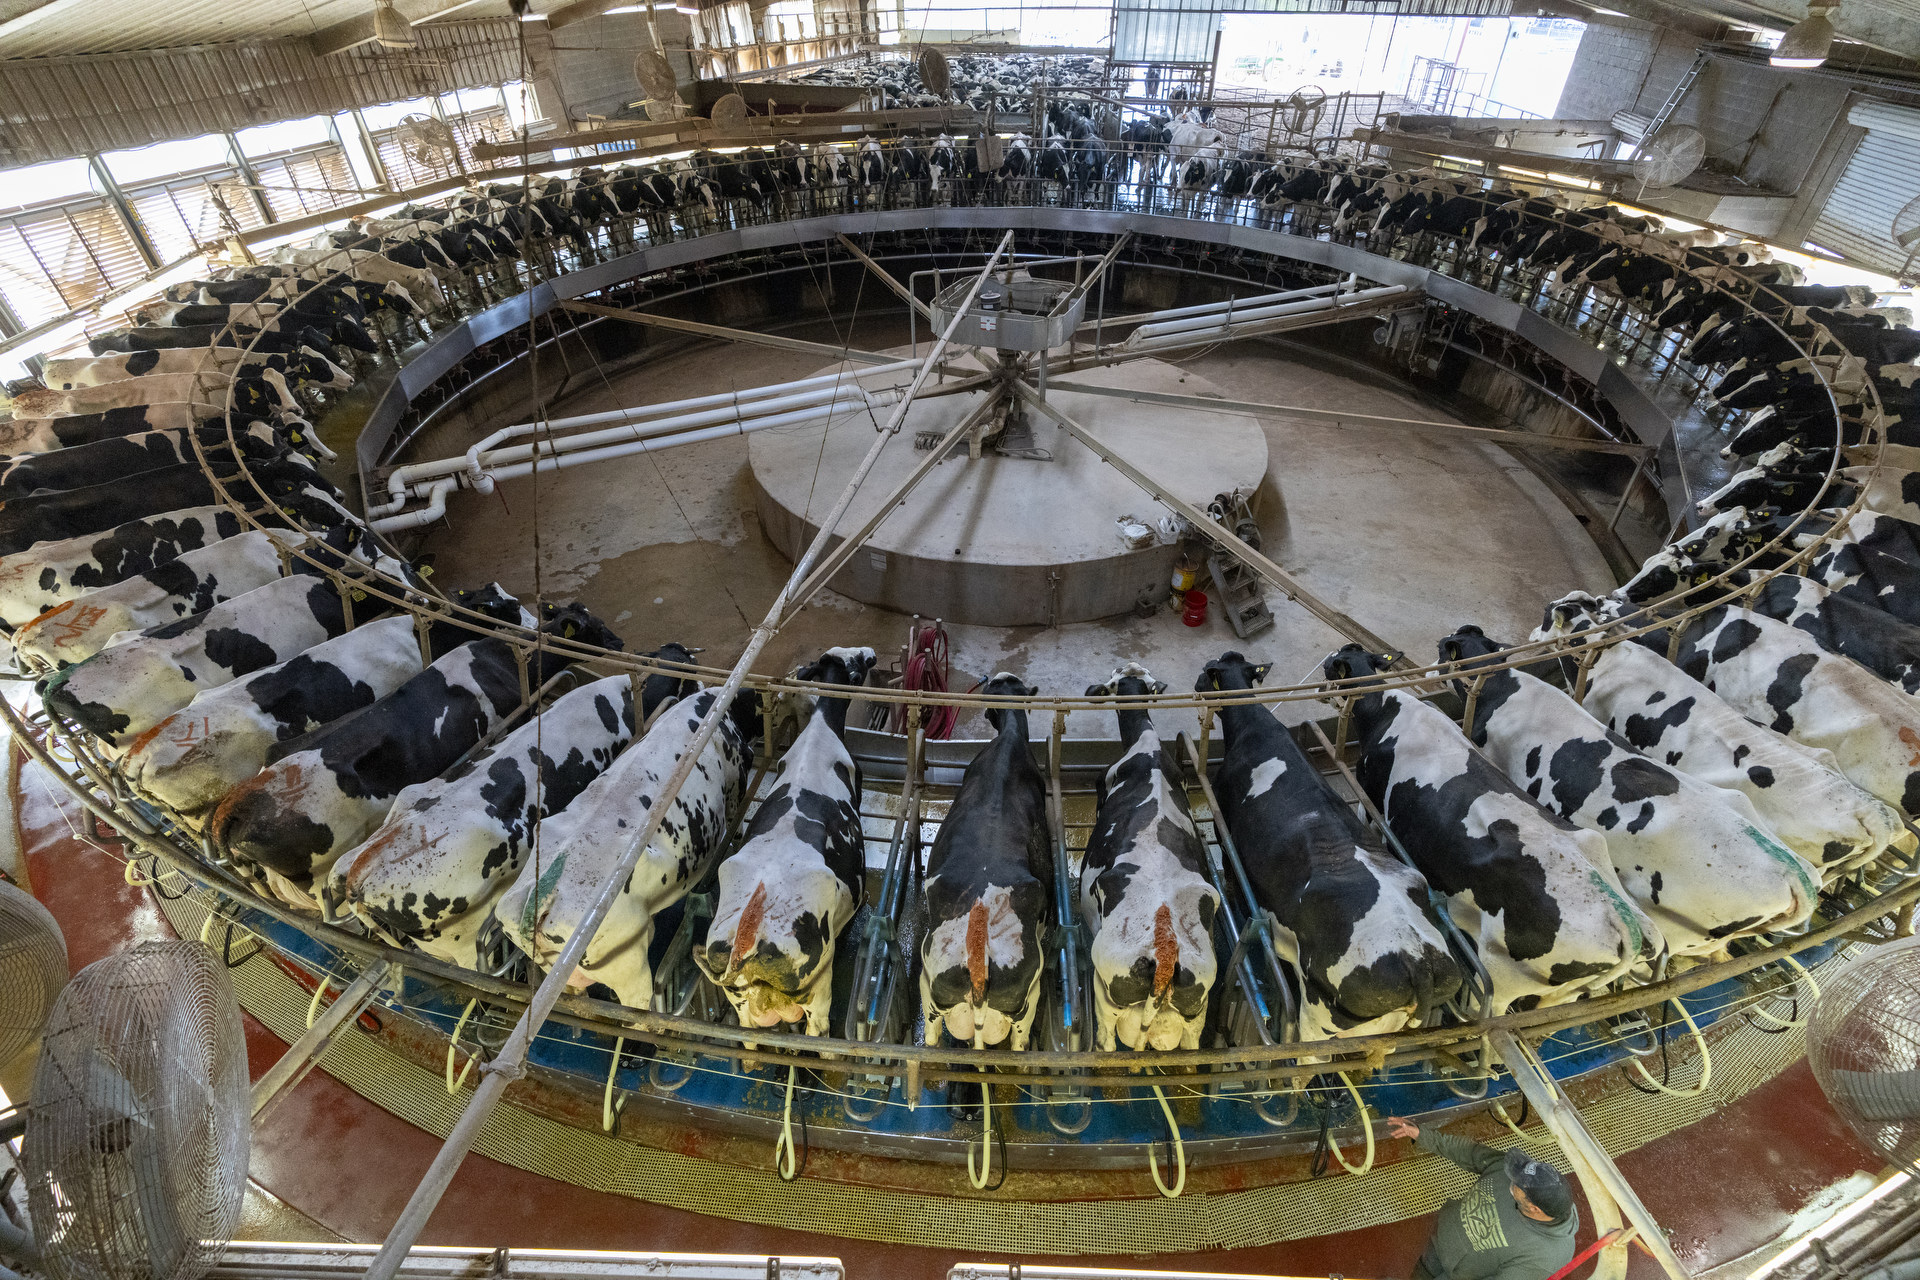 An overhead view of the automatic milker filled with black and white Holstein cows in the milking parlor at Volleman's Family Farms.  